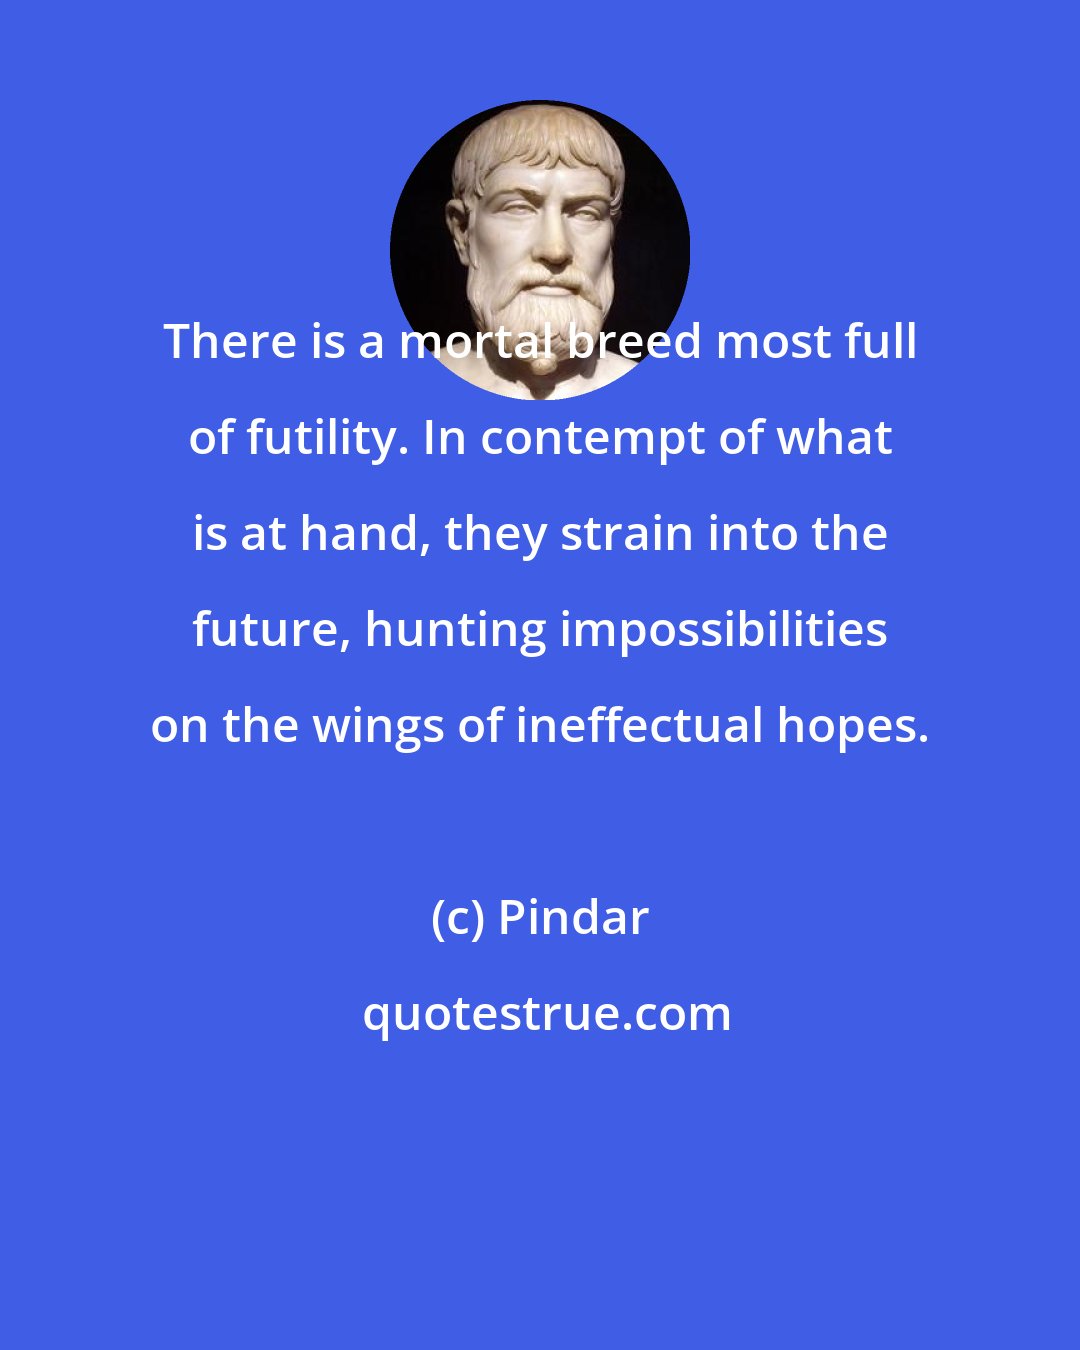 Pindar: There is a mortal breed most full of futility. In contempt of what is at hand, they strain into the future, hunting impossibilities on the wings of ineffectual hopes.